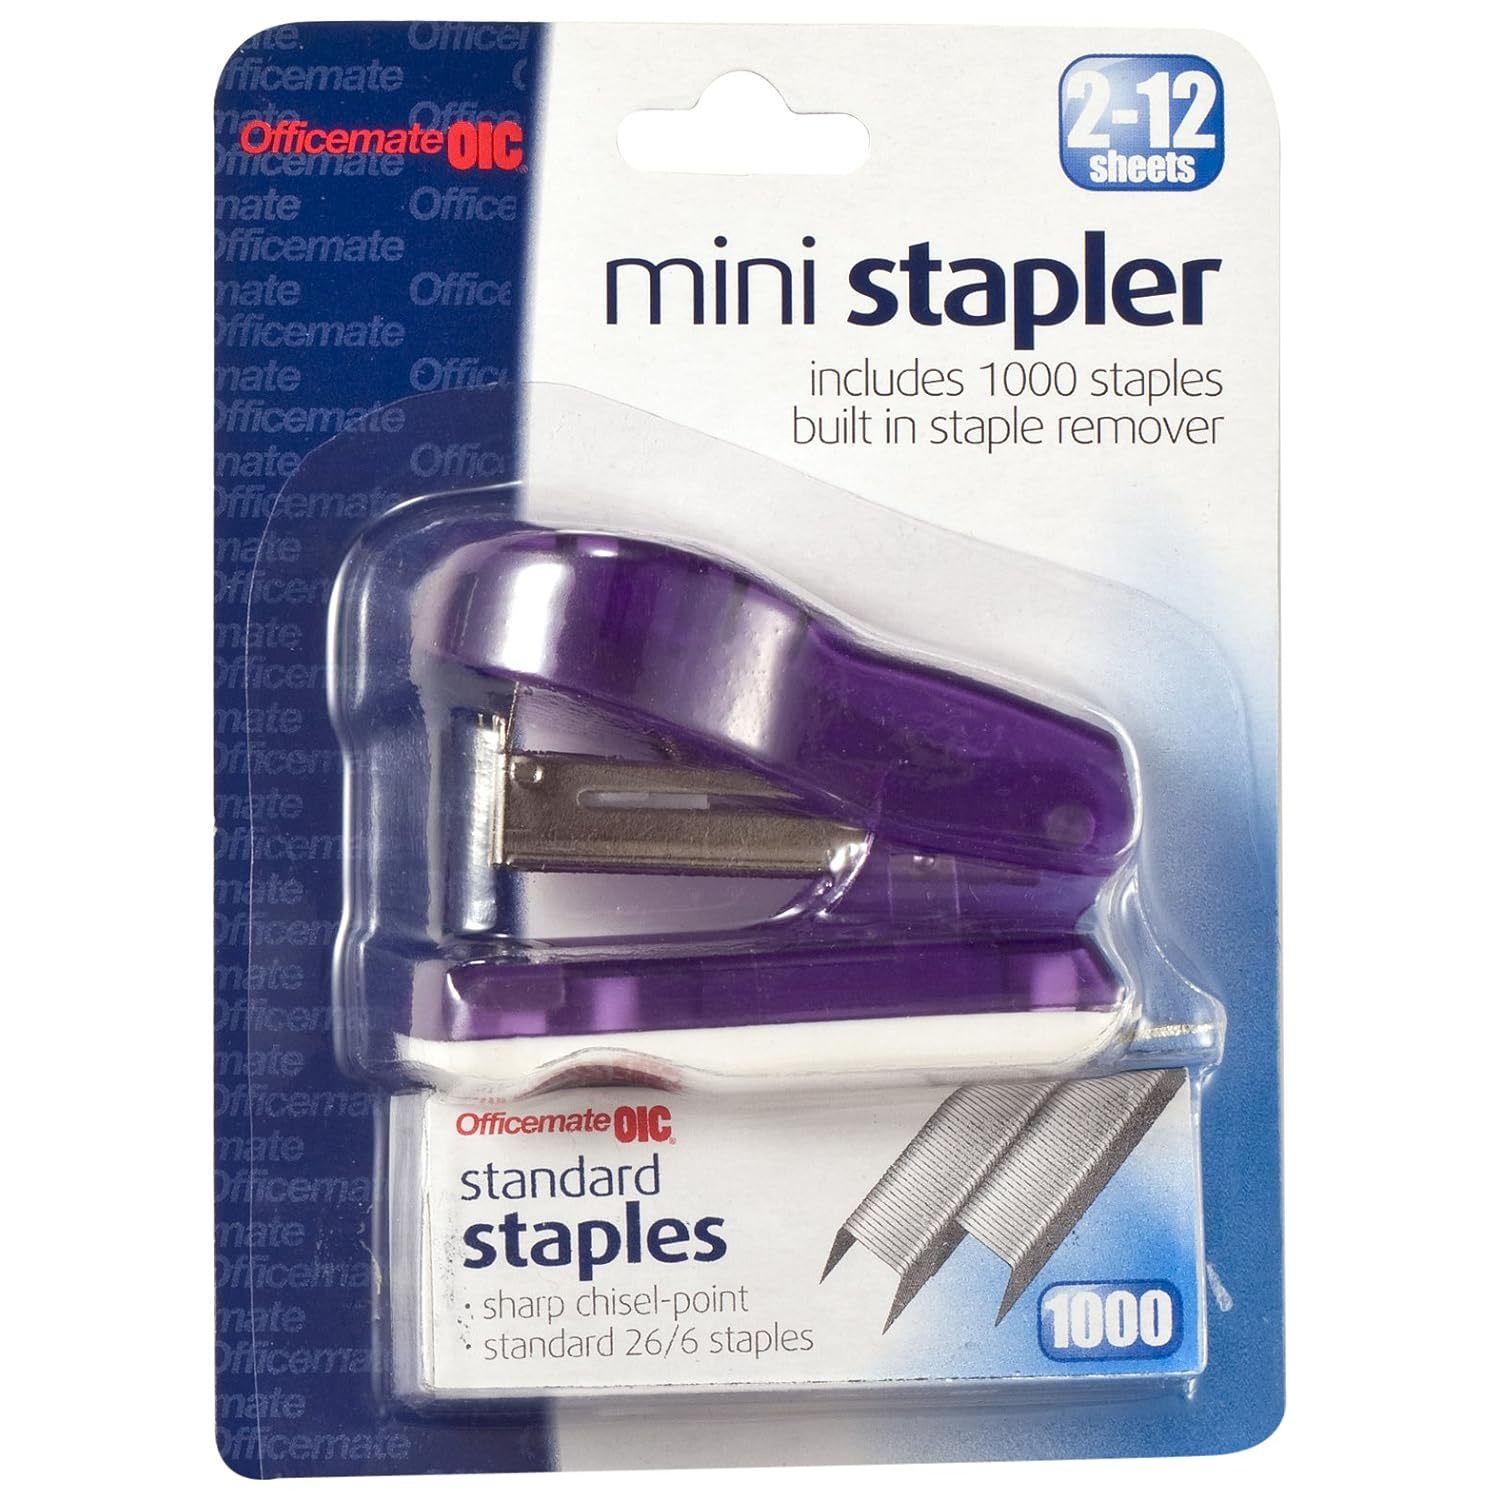 Officemate Mini Stapler with 1000 Standard Staples, Comes in Assorted Colors - R - $12.99